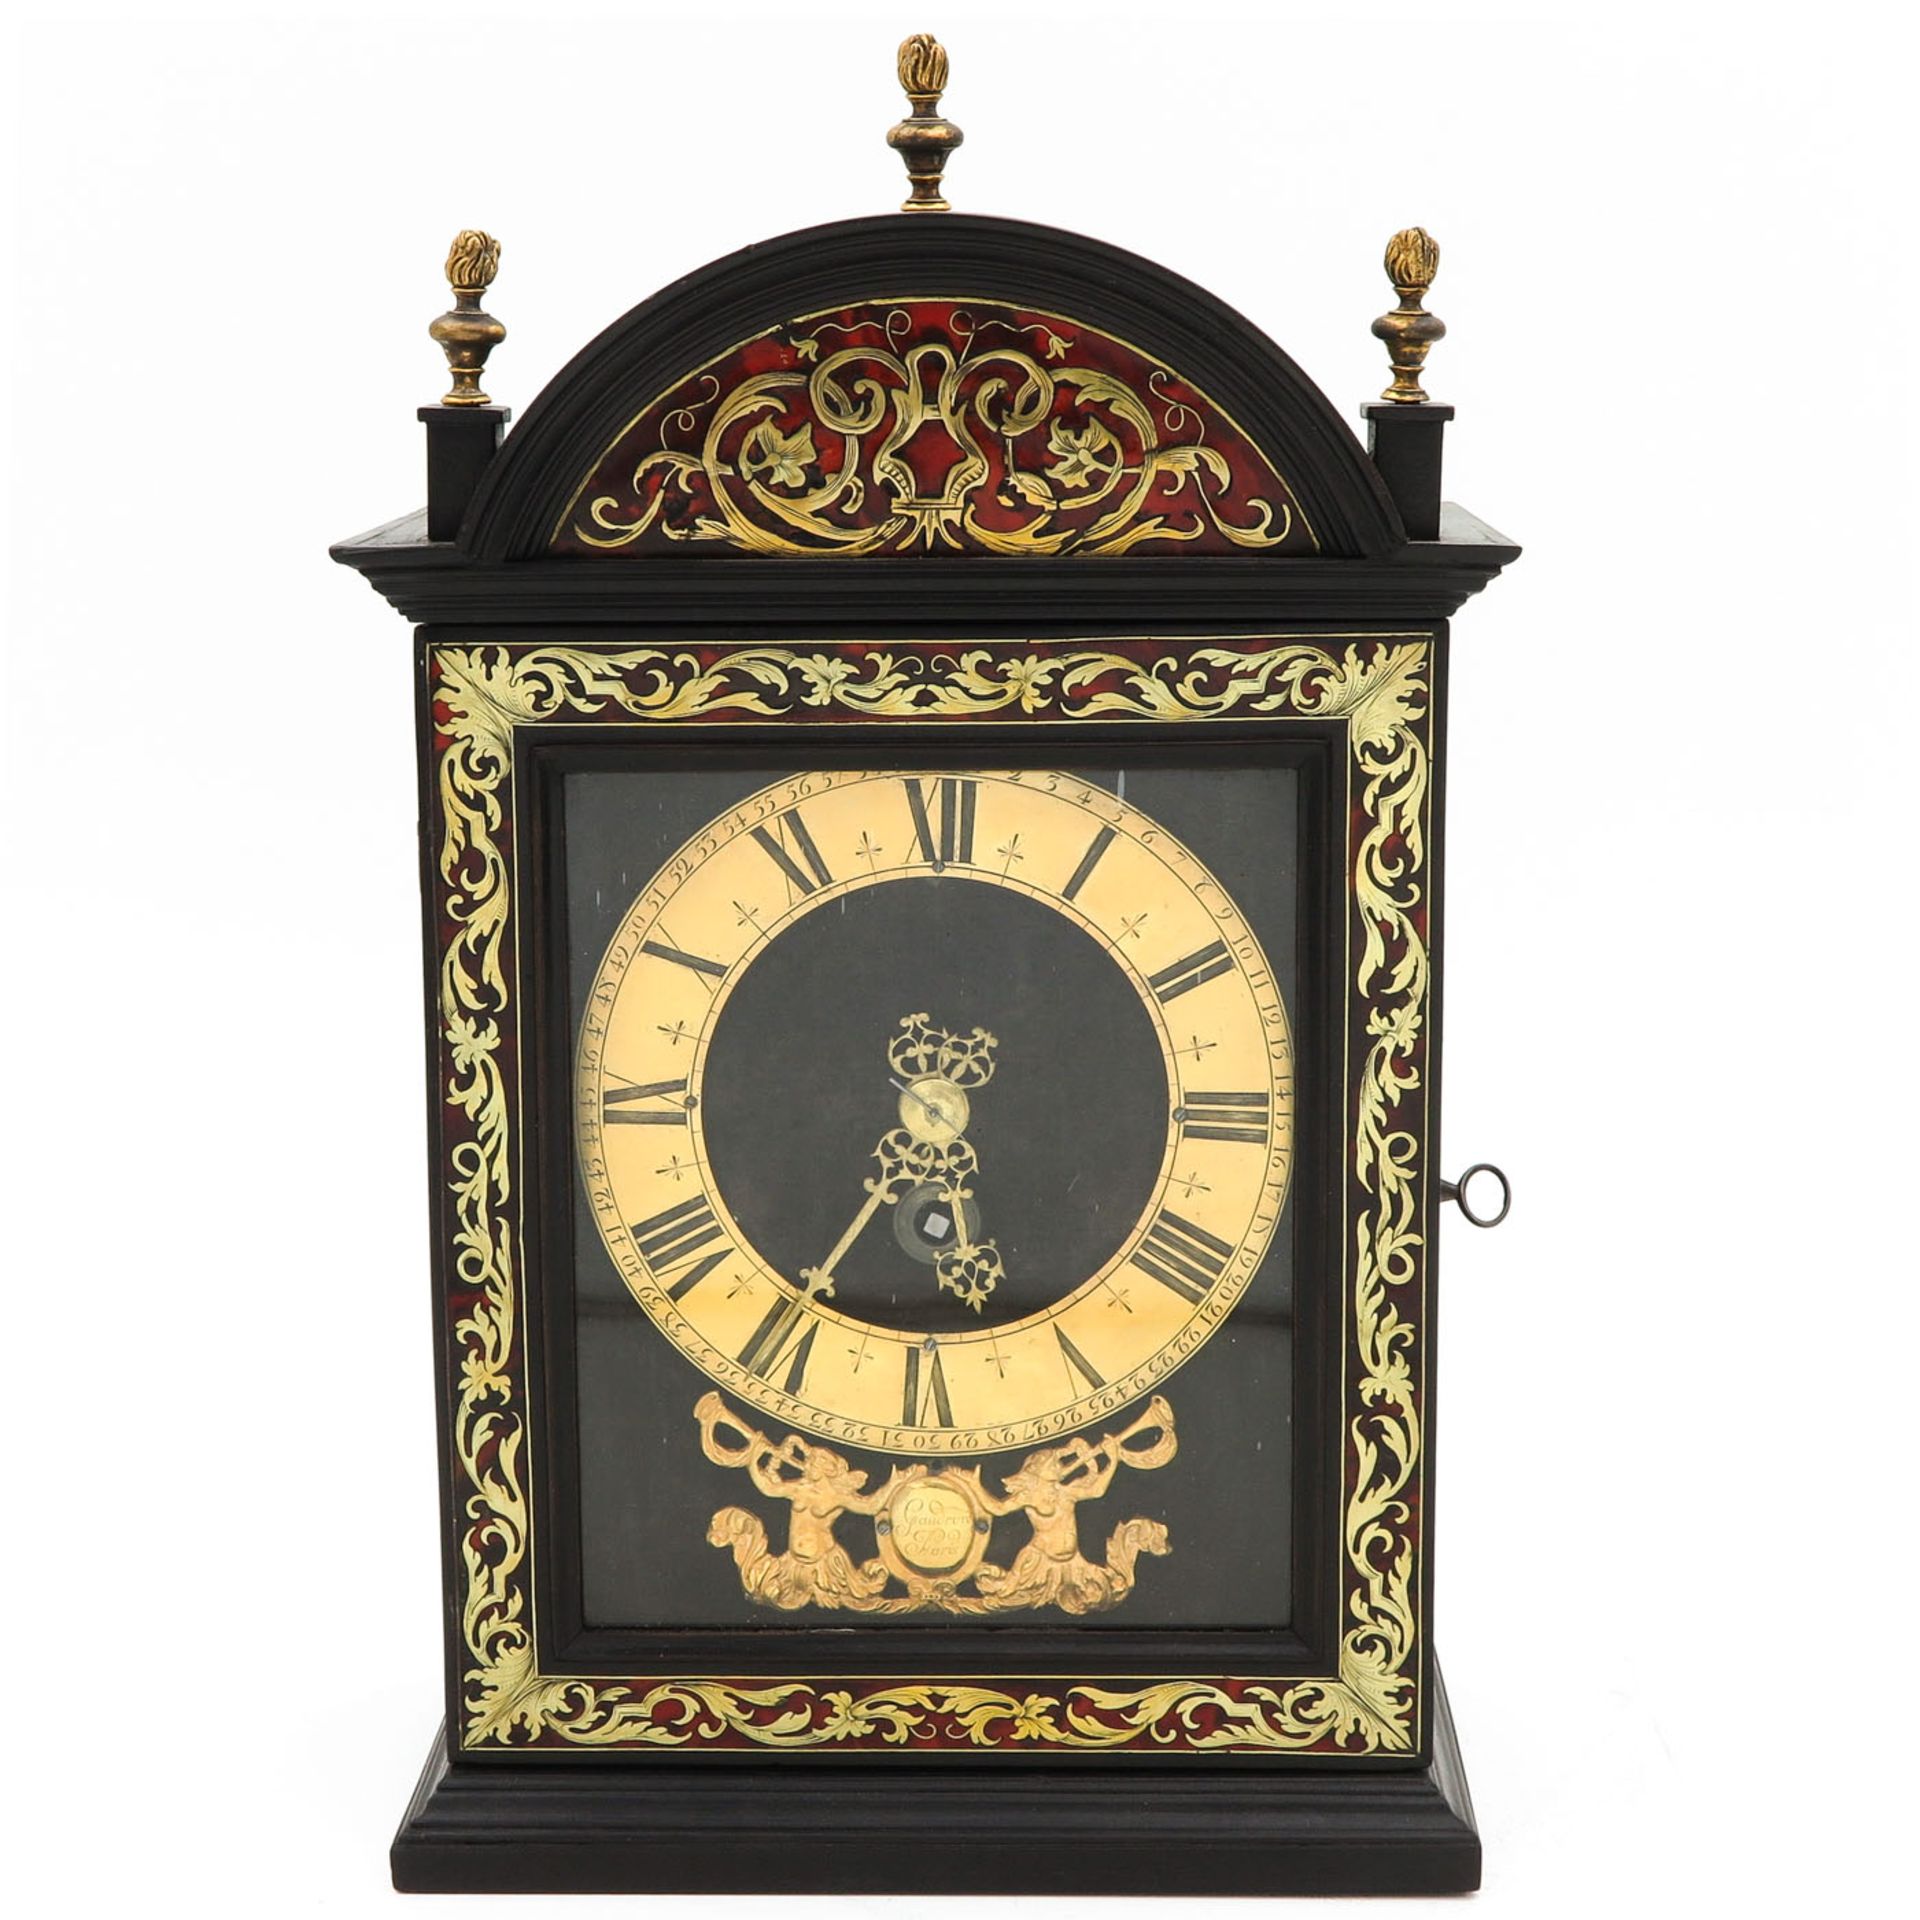 A Signed 17th Century French Religious Clock